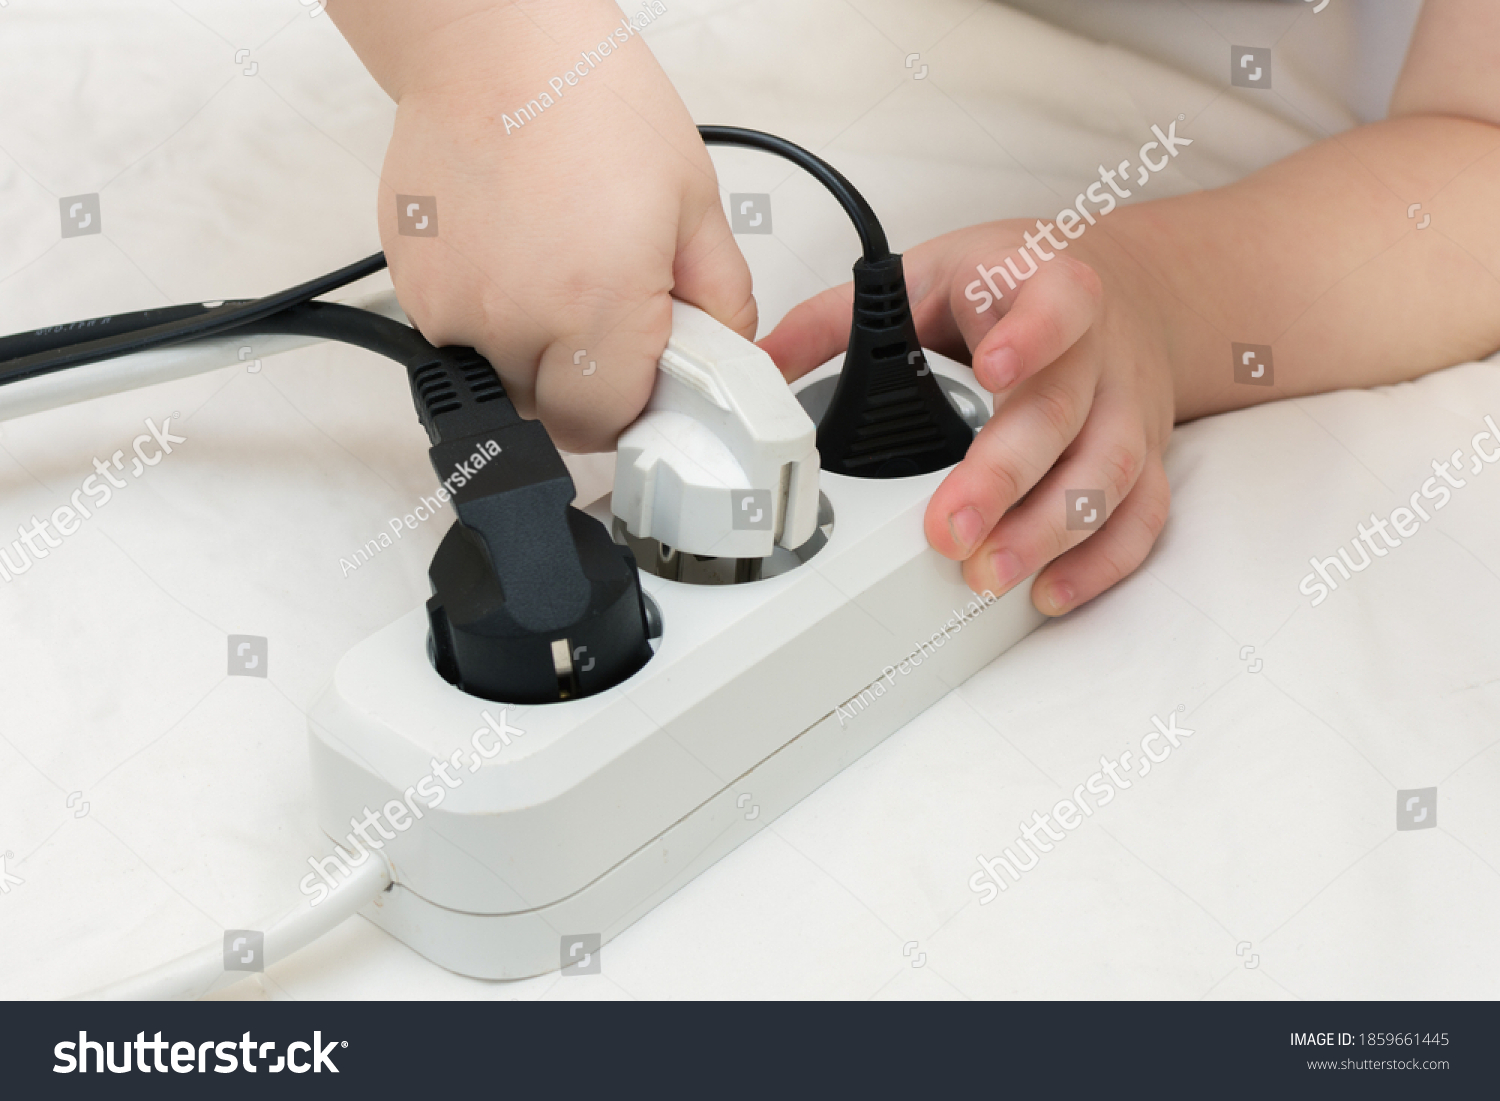 Close-up of a child's hand inserting or removing a white electrical plug into a working outlet where there are already two black plugs. The idea is that playing with electricity can harm children #1859661445